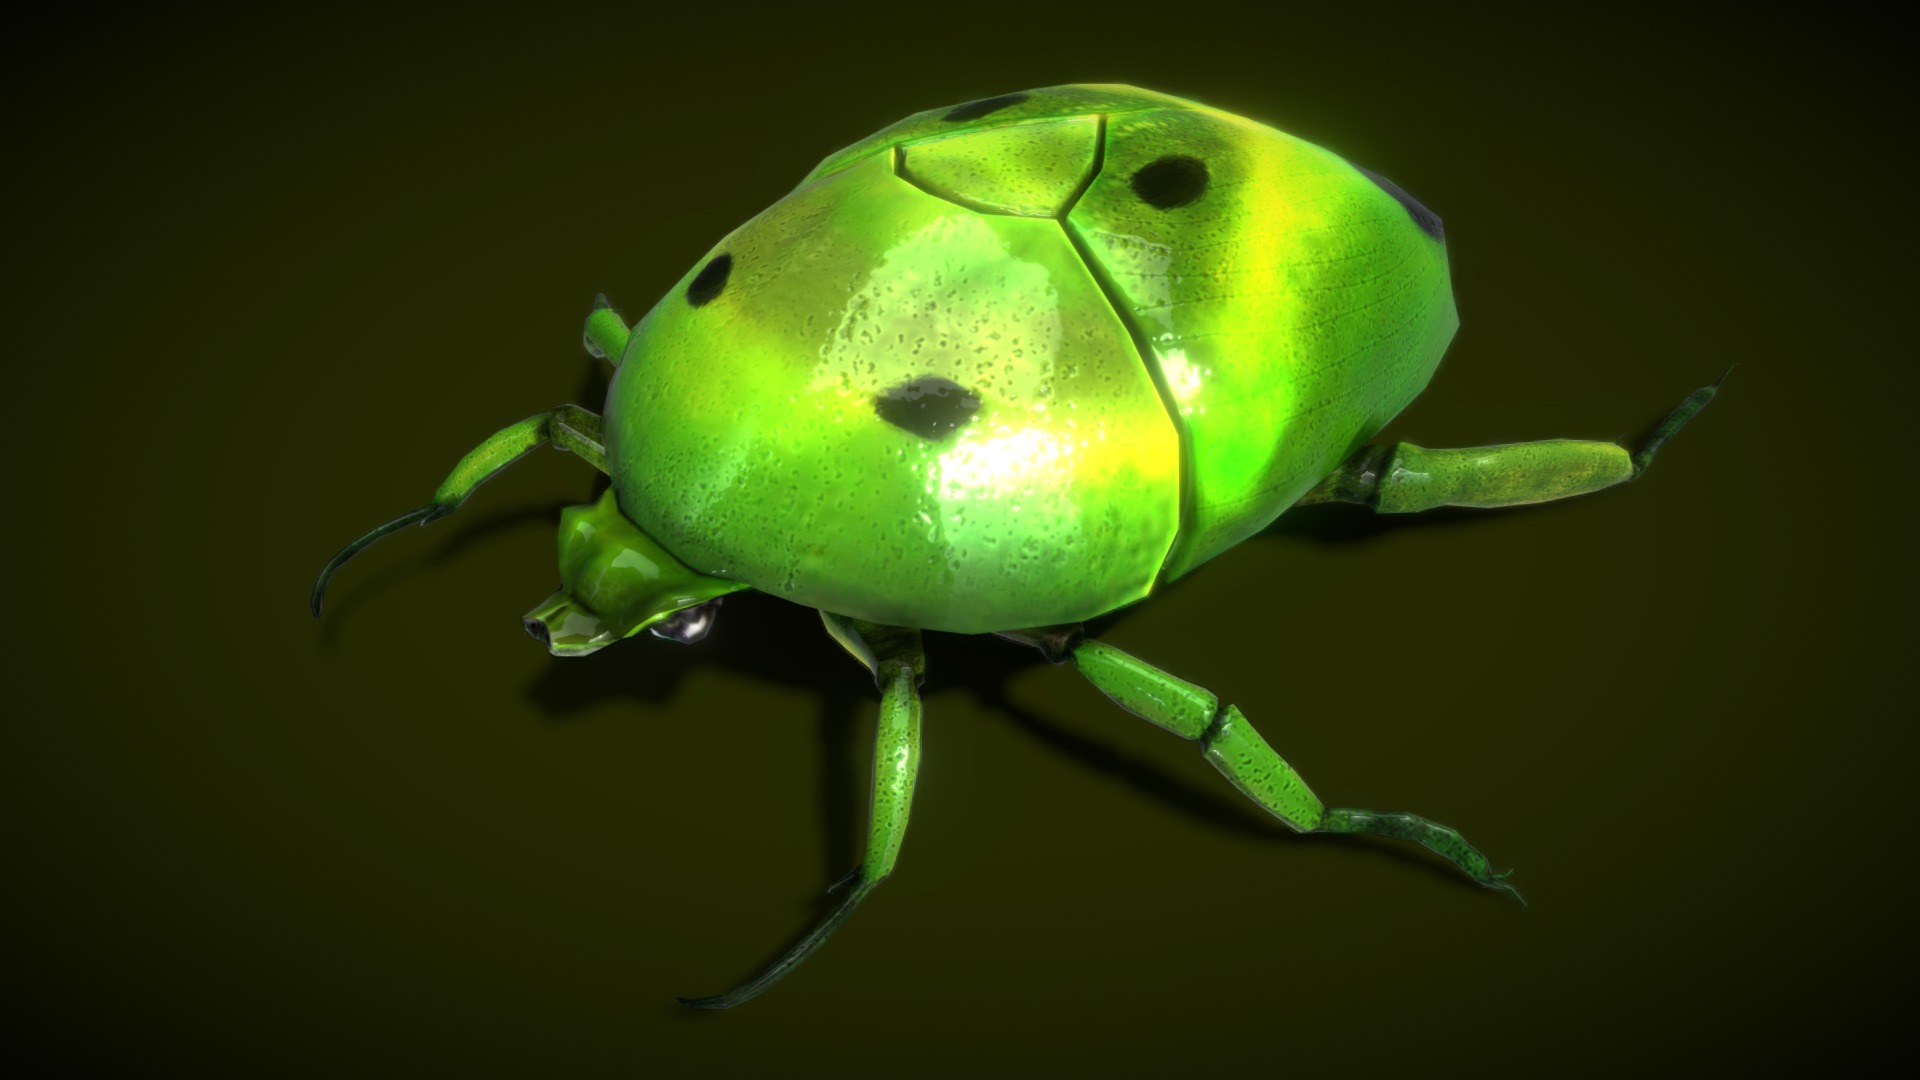 3D model Beetle Lowpoly 3D - This is a 3D model of the Beetle Lowpoly 3D. The 3D model is about a green frog on a leaf.